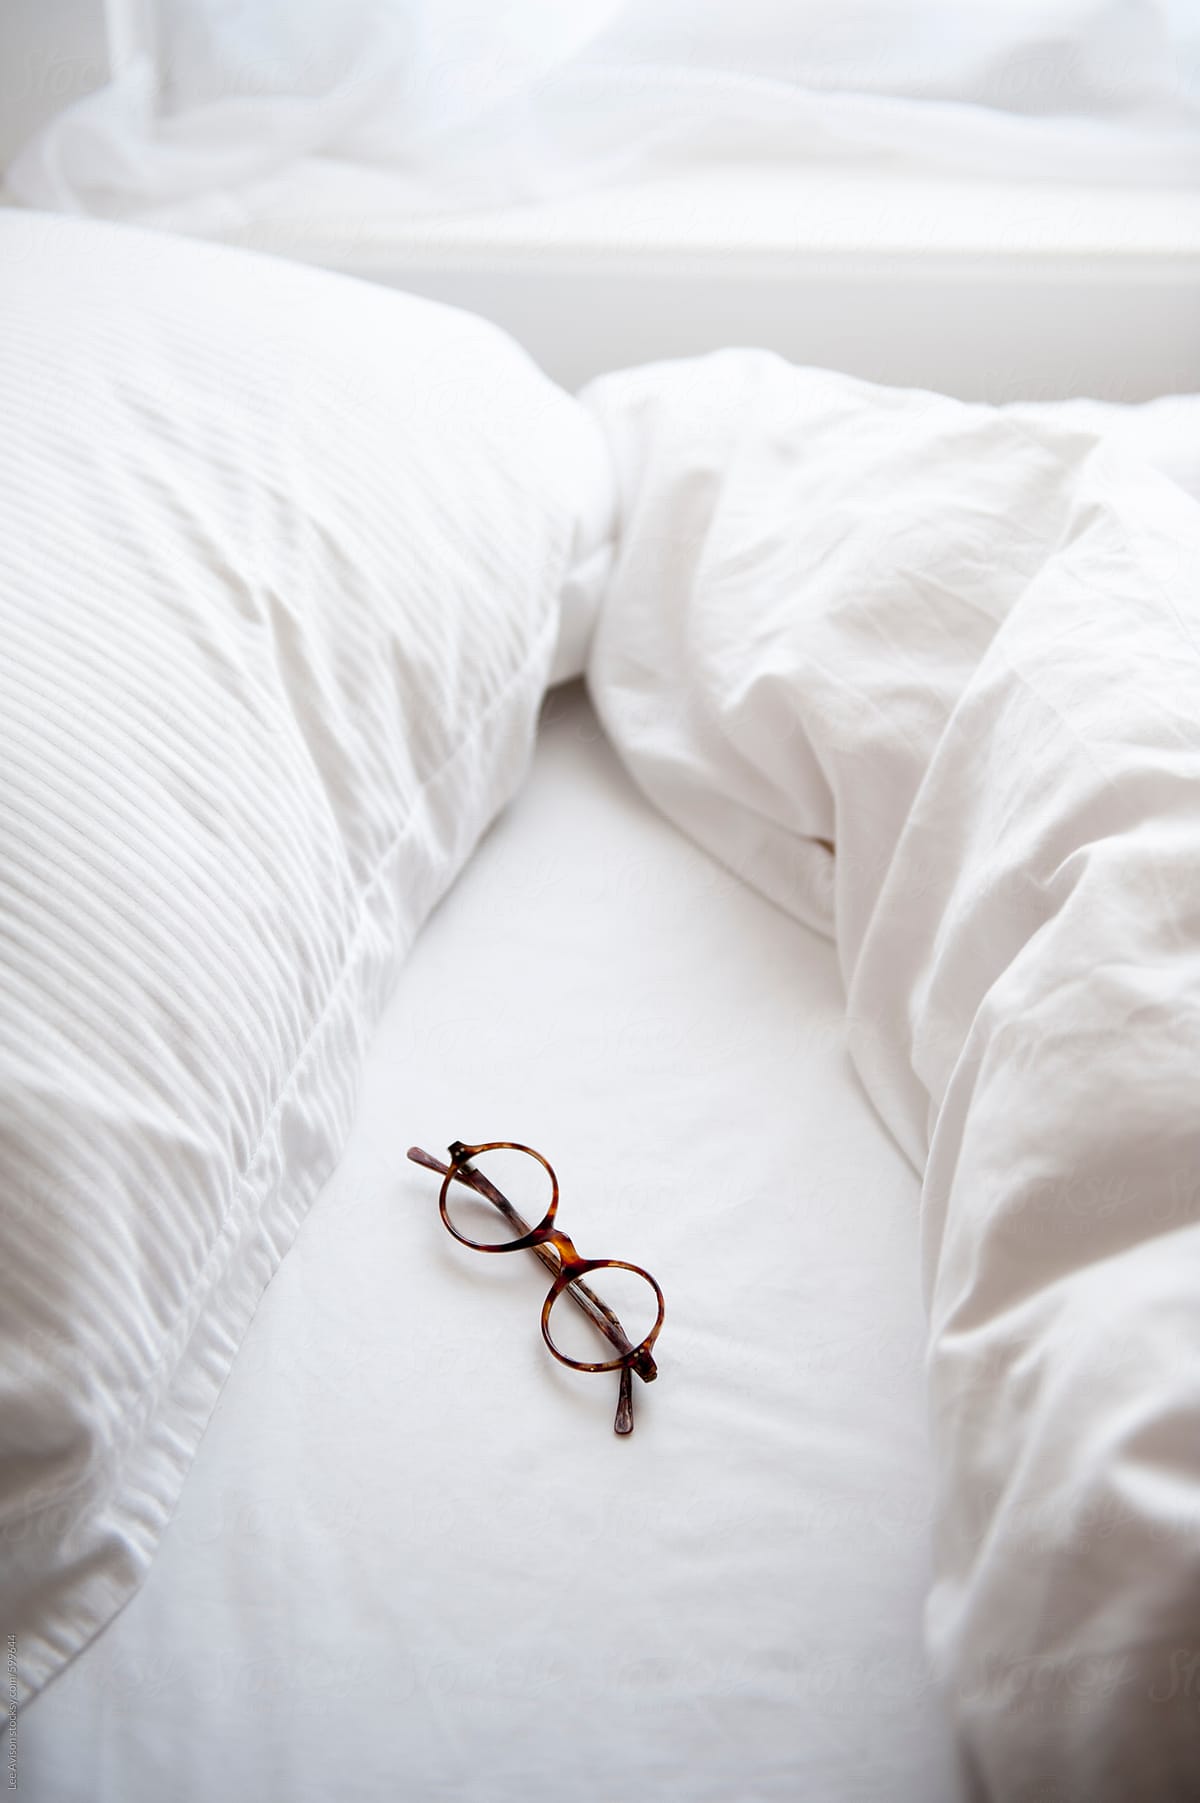 vintage spectacles on an unmade bed